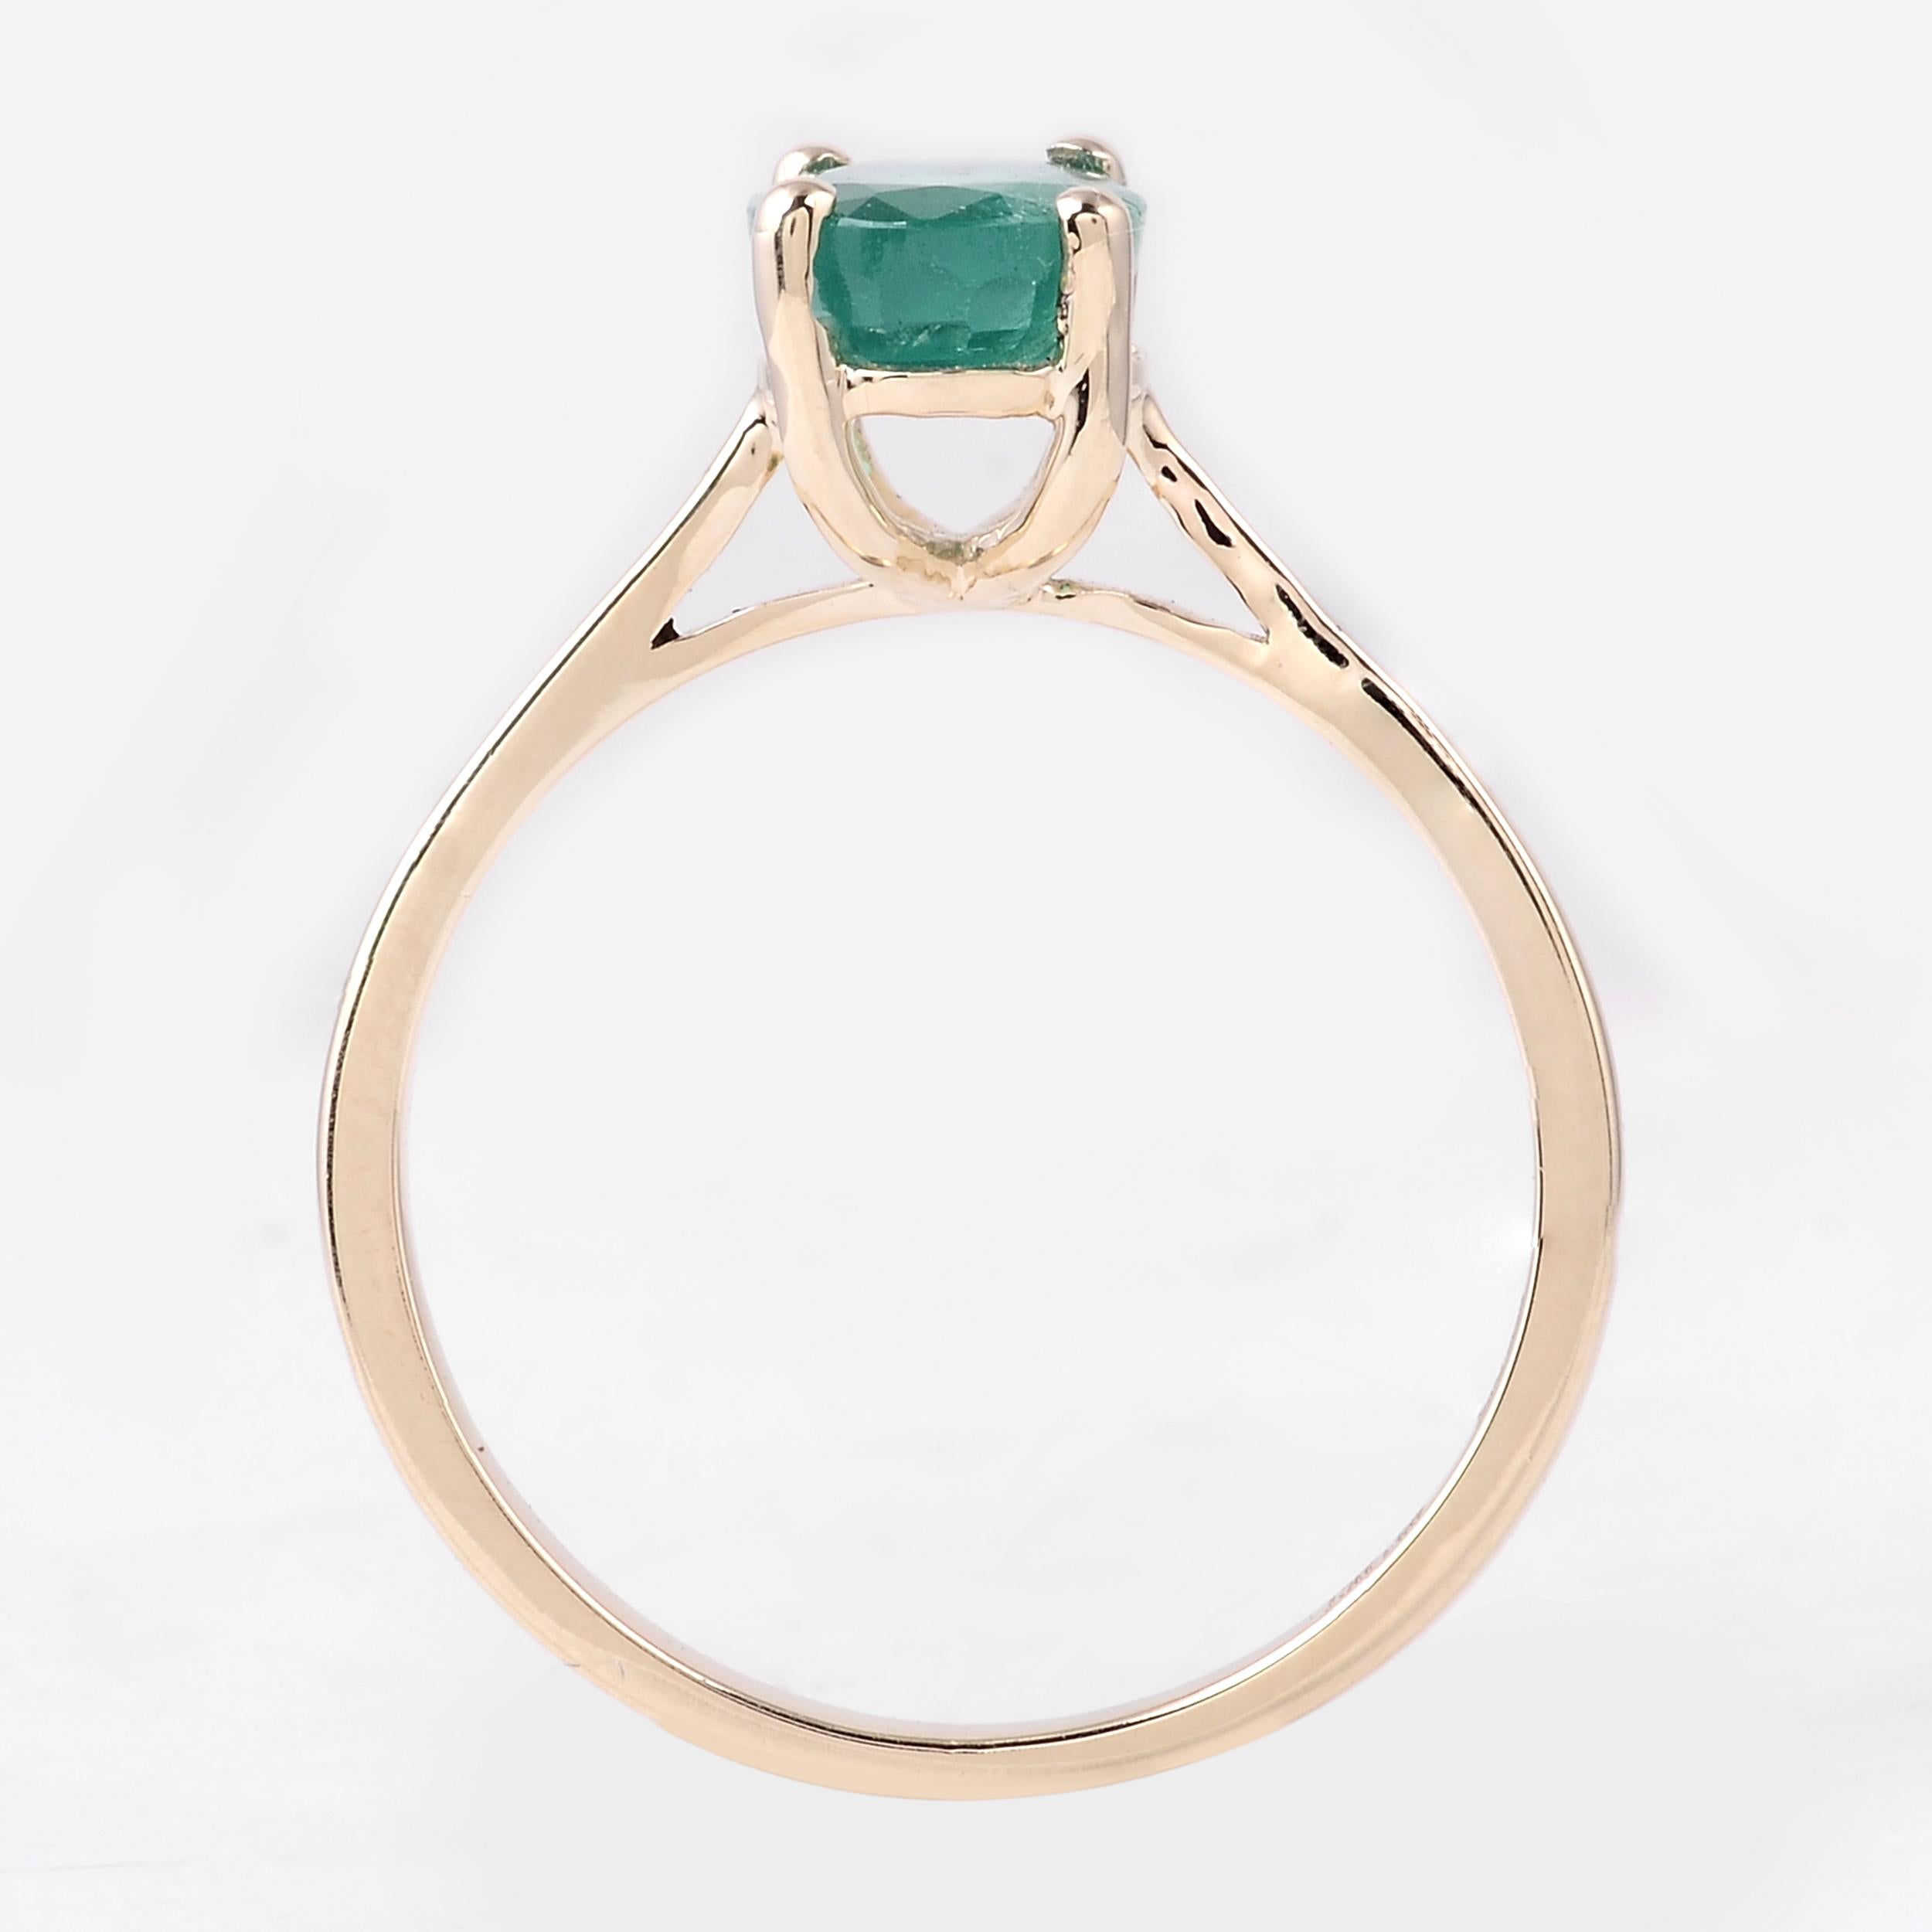 Elegant 14K 1.33ct Emerald Cocktail Ring, Size 7 - Timeless & Elegant Jewelry In New Condition For Sale In Holtsville, NY